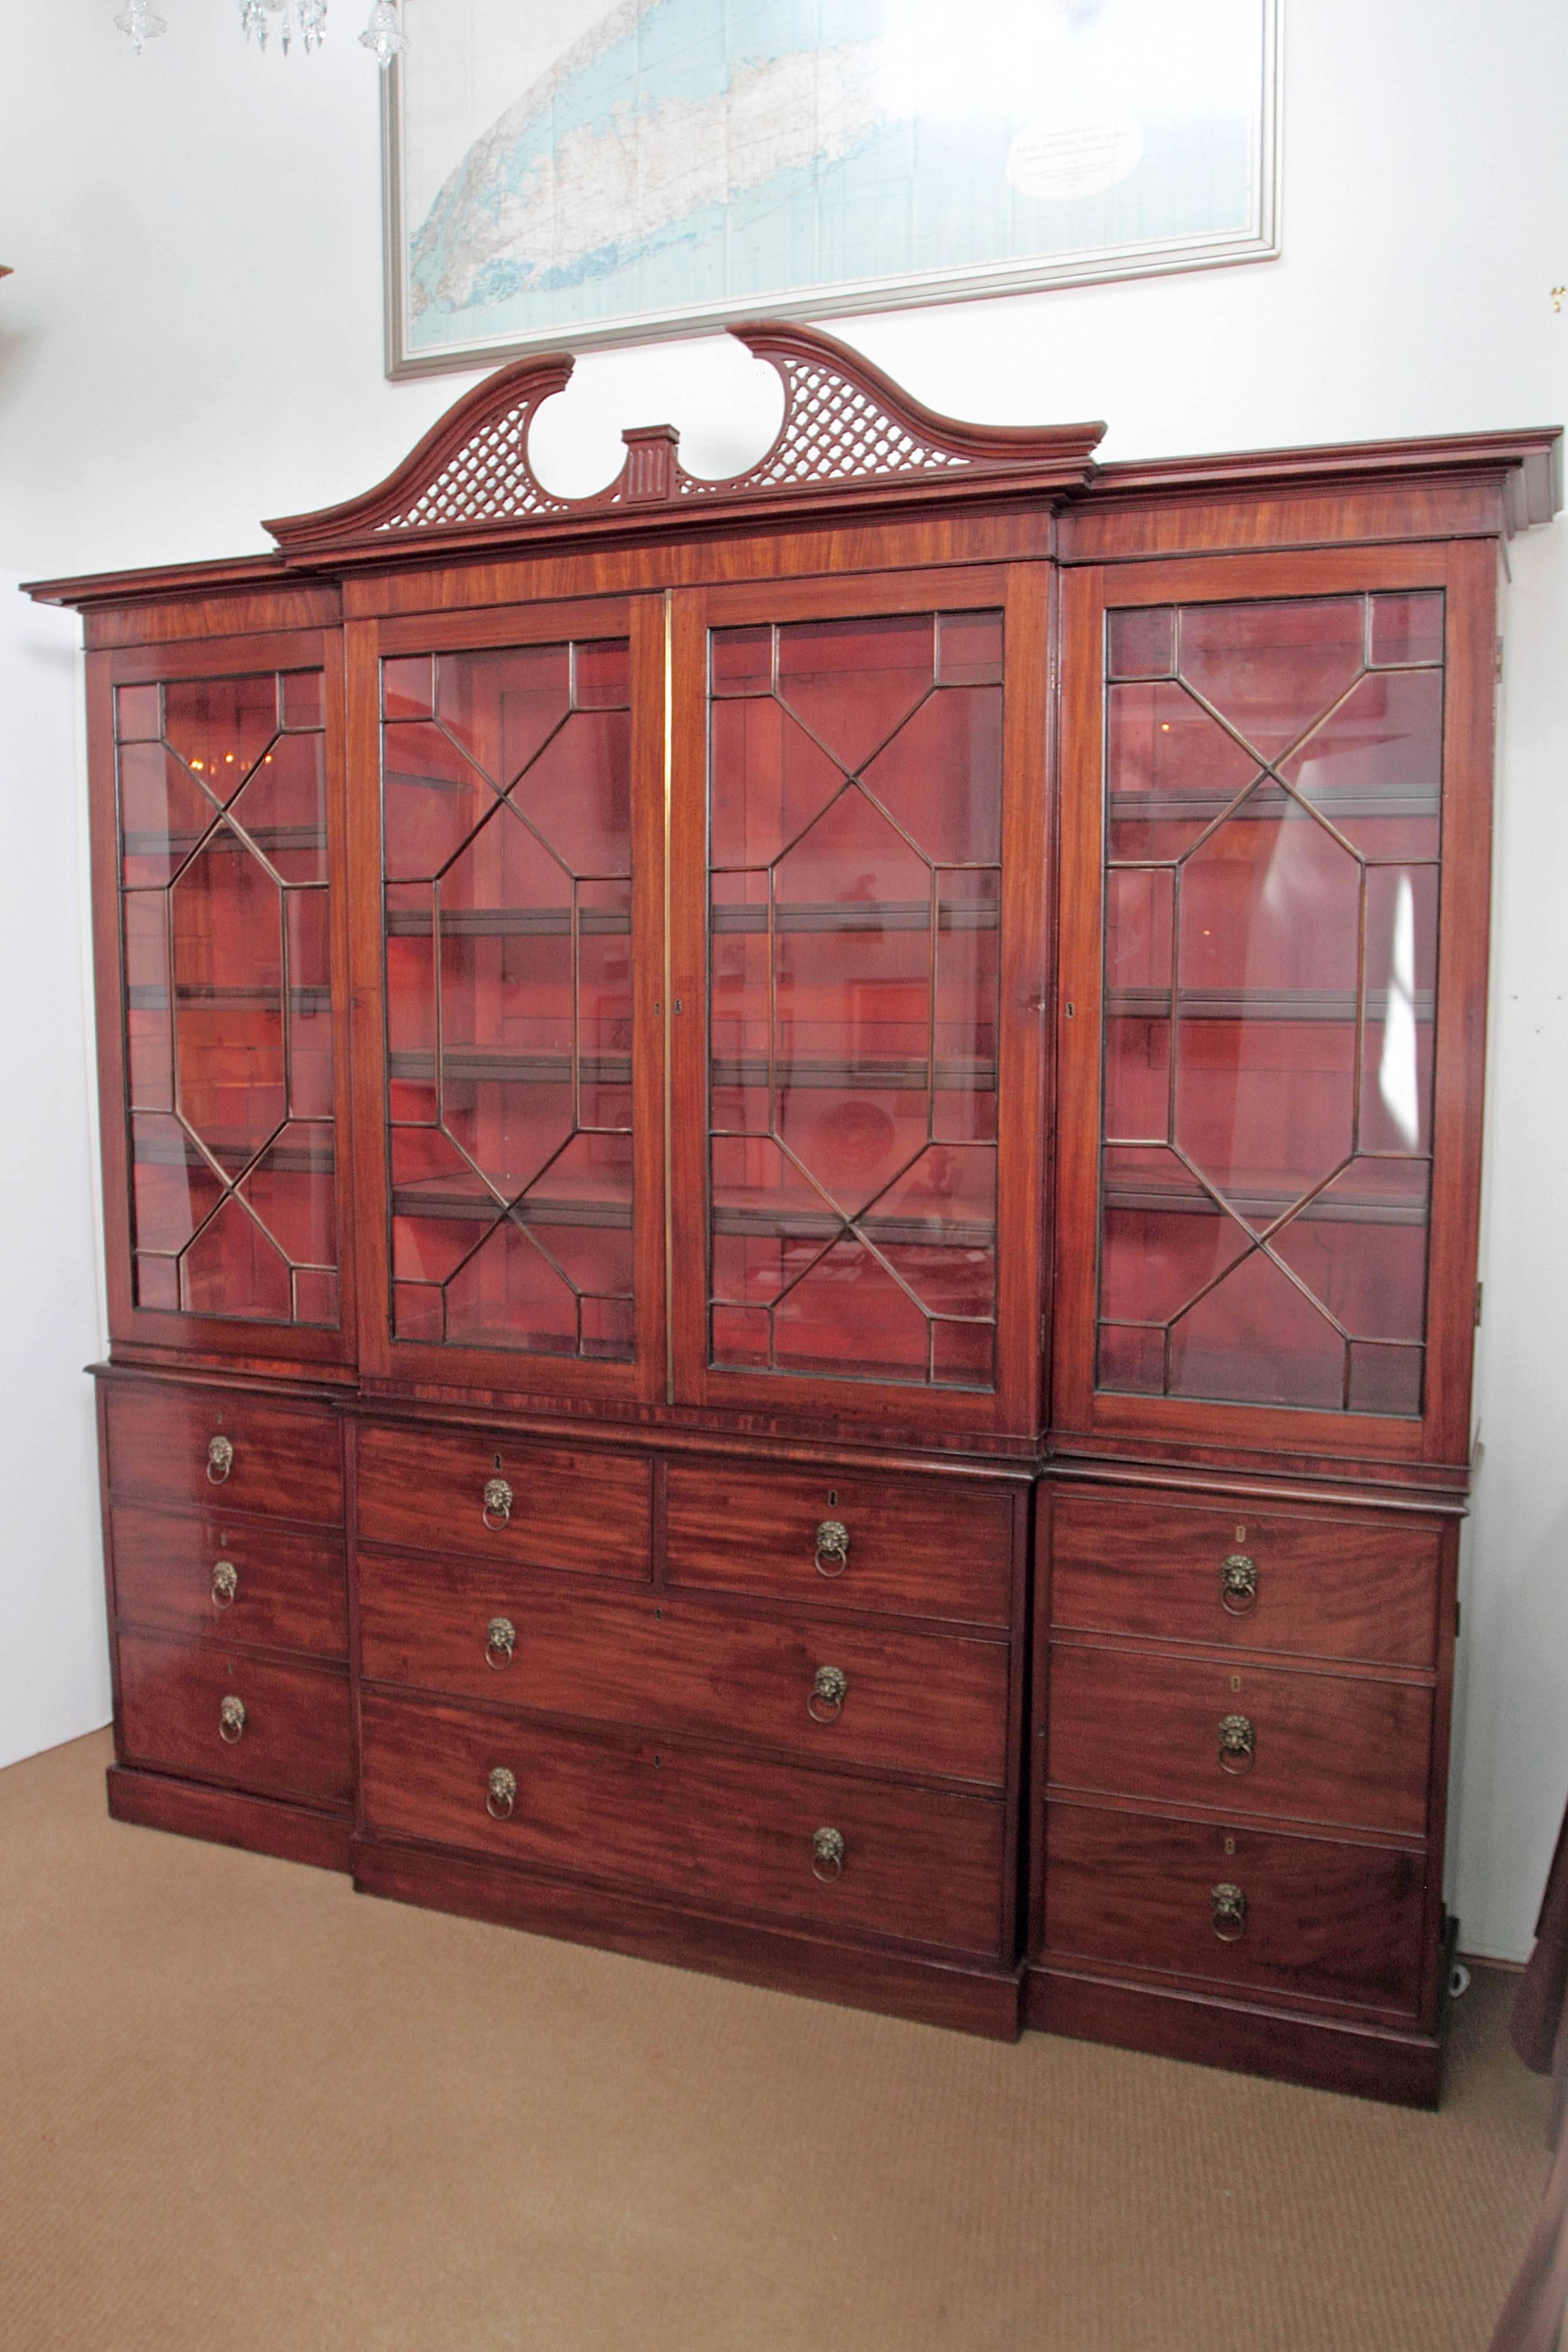 An elegant period George III mahogany breakfront bookcase / China cabinet with simple cornice and split pediment with lattice. Four (4) mullioned glass doors at the top with shelves inside. Bottom portion has two (2) small drawers above two (2)